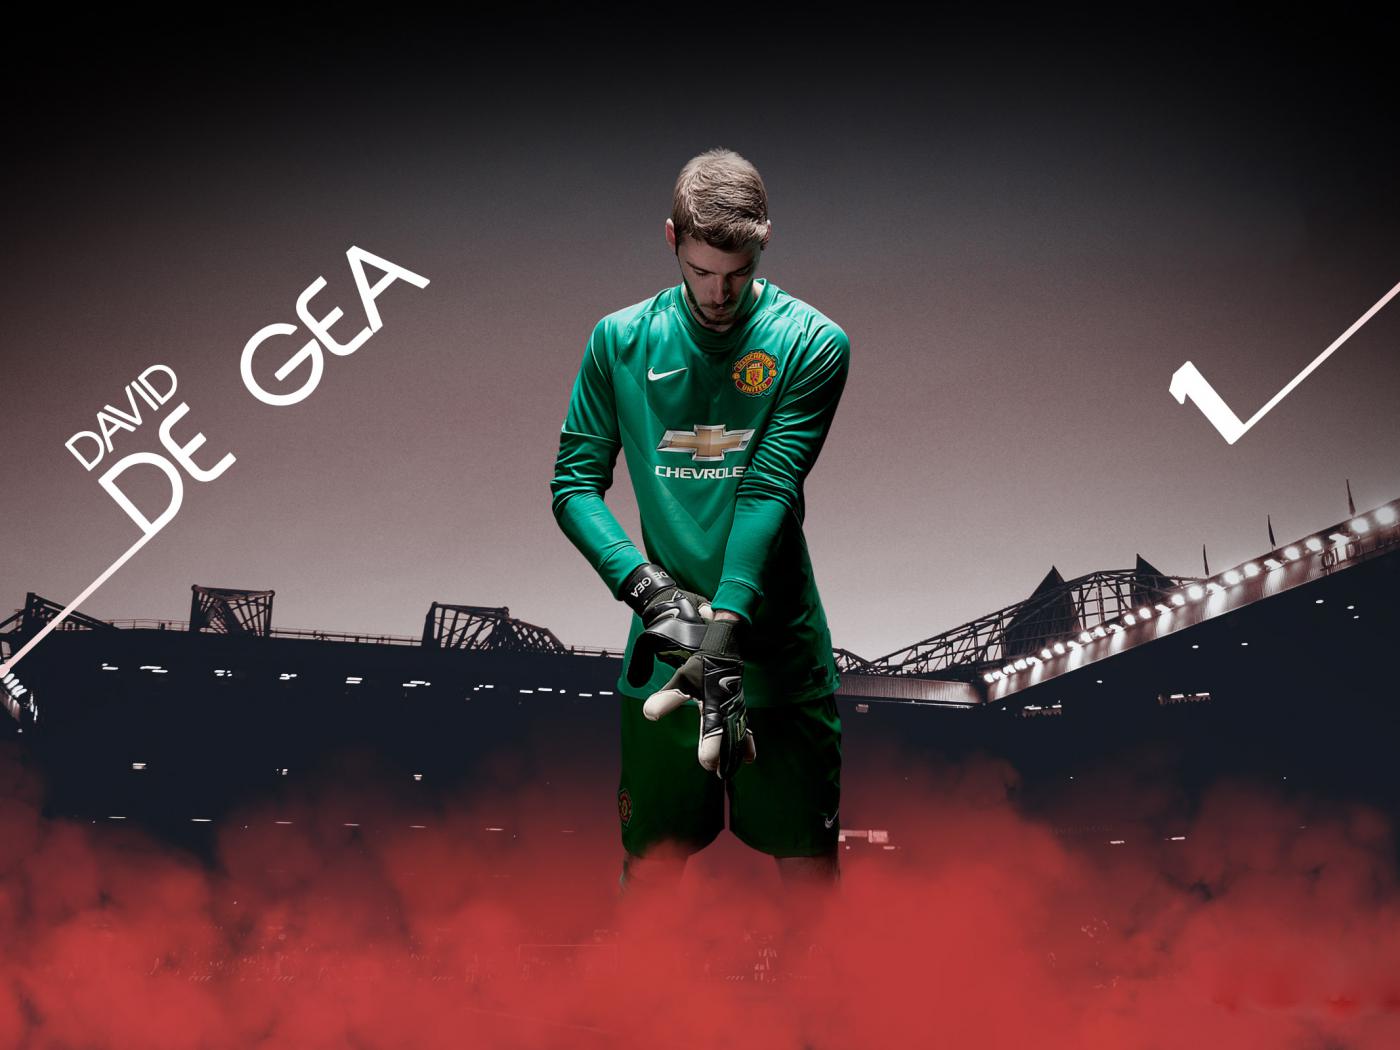 [49+] 1920X1080 Wallpaper Manchester United 2016 on ...